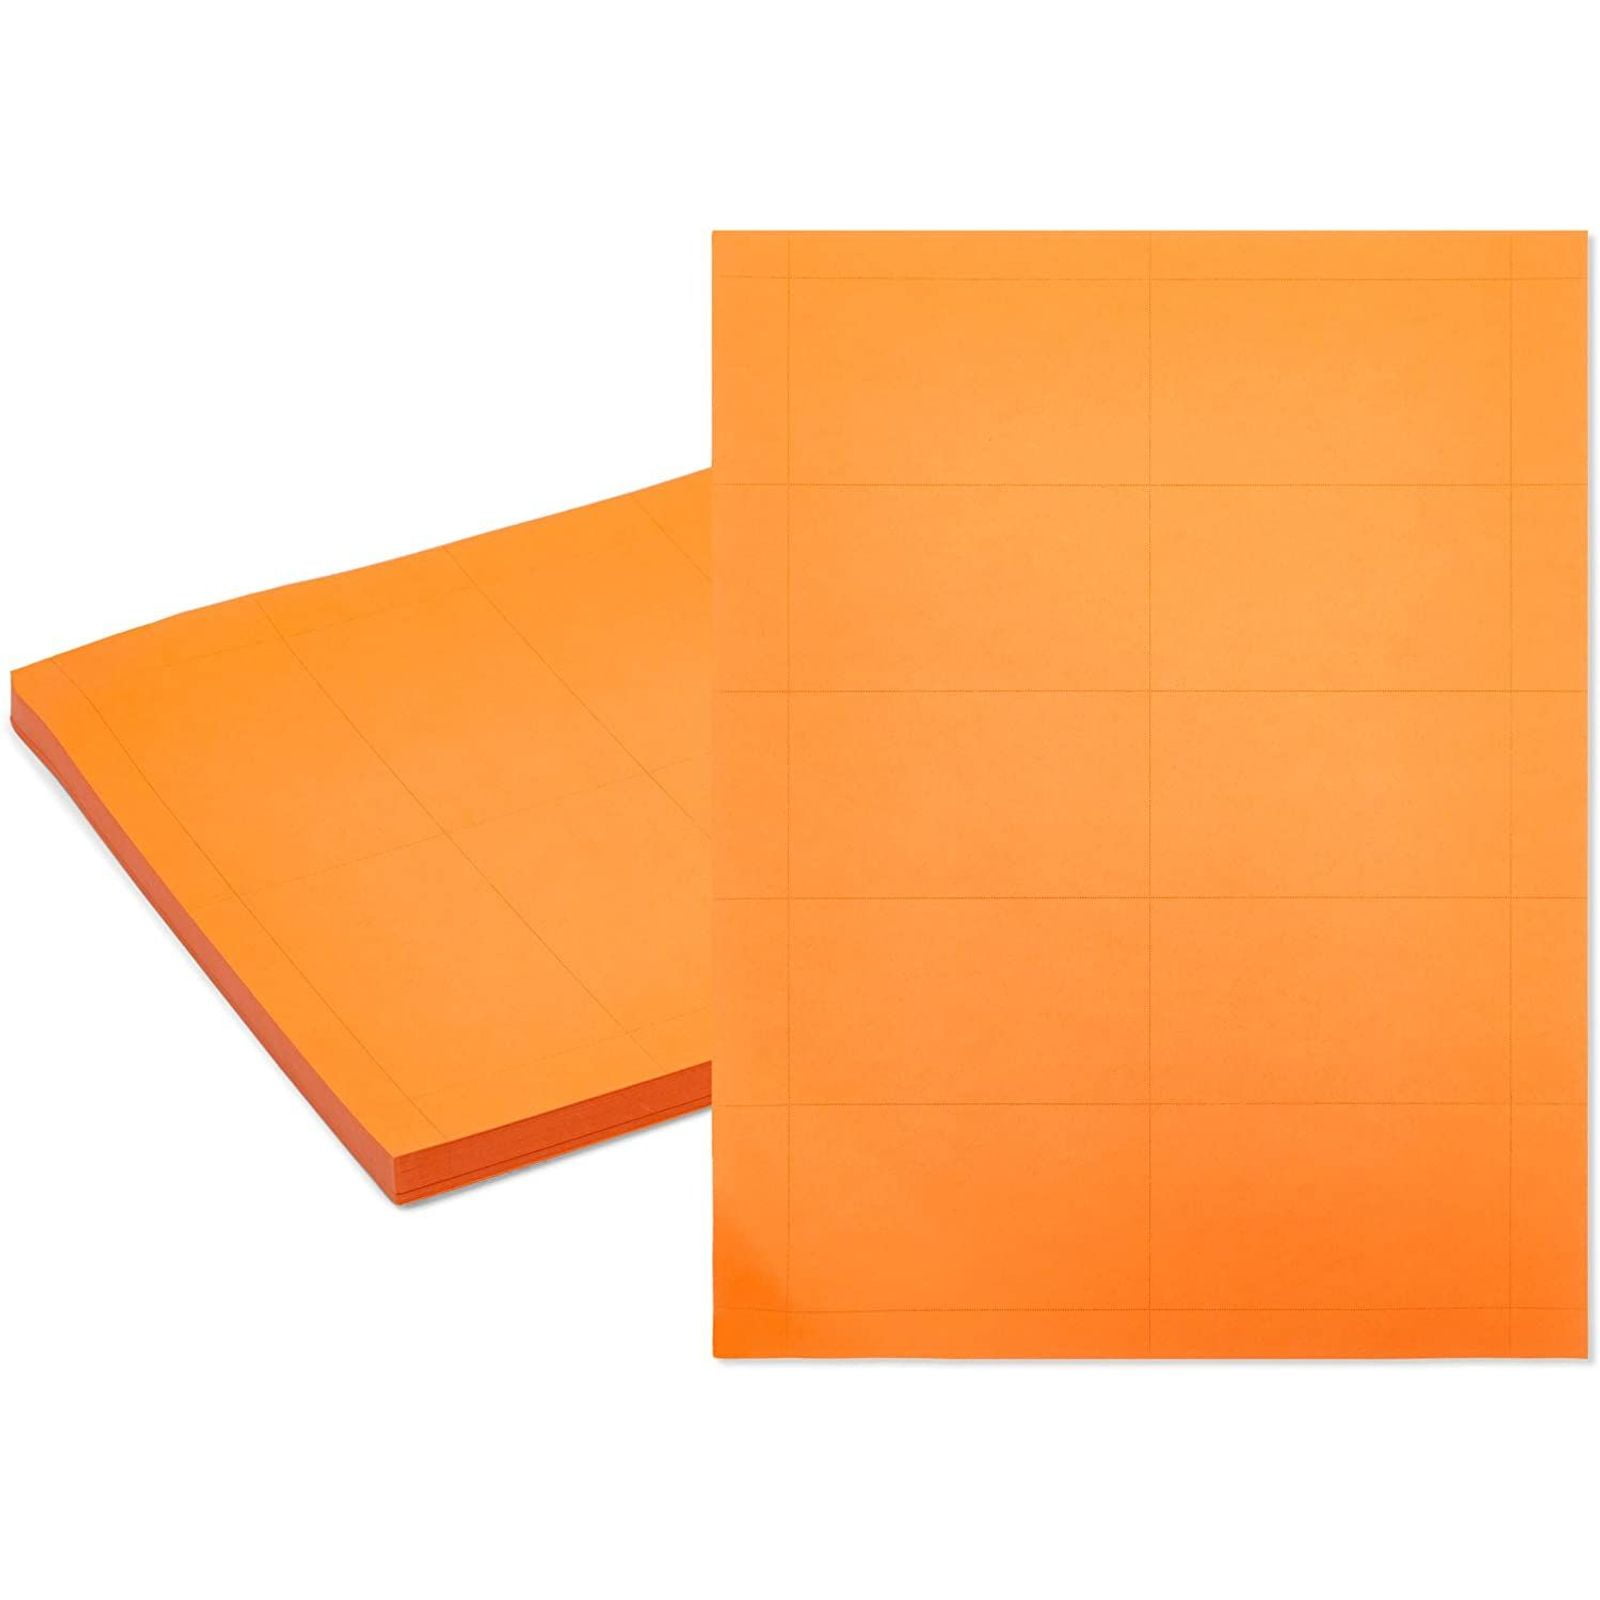 Stockroom Plus 50 Sheets 500 Cards A4 Size Orange Printable Business Card Sheets 3.5 x 2 in